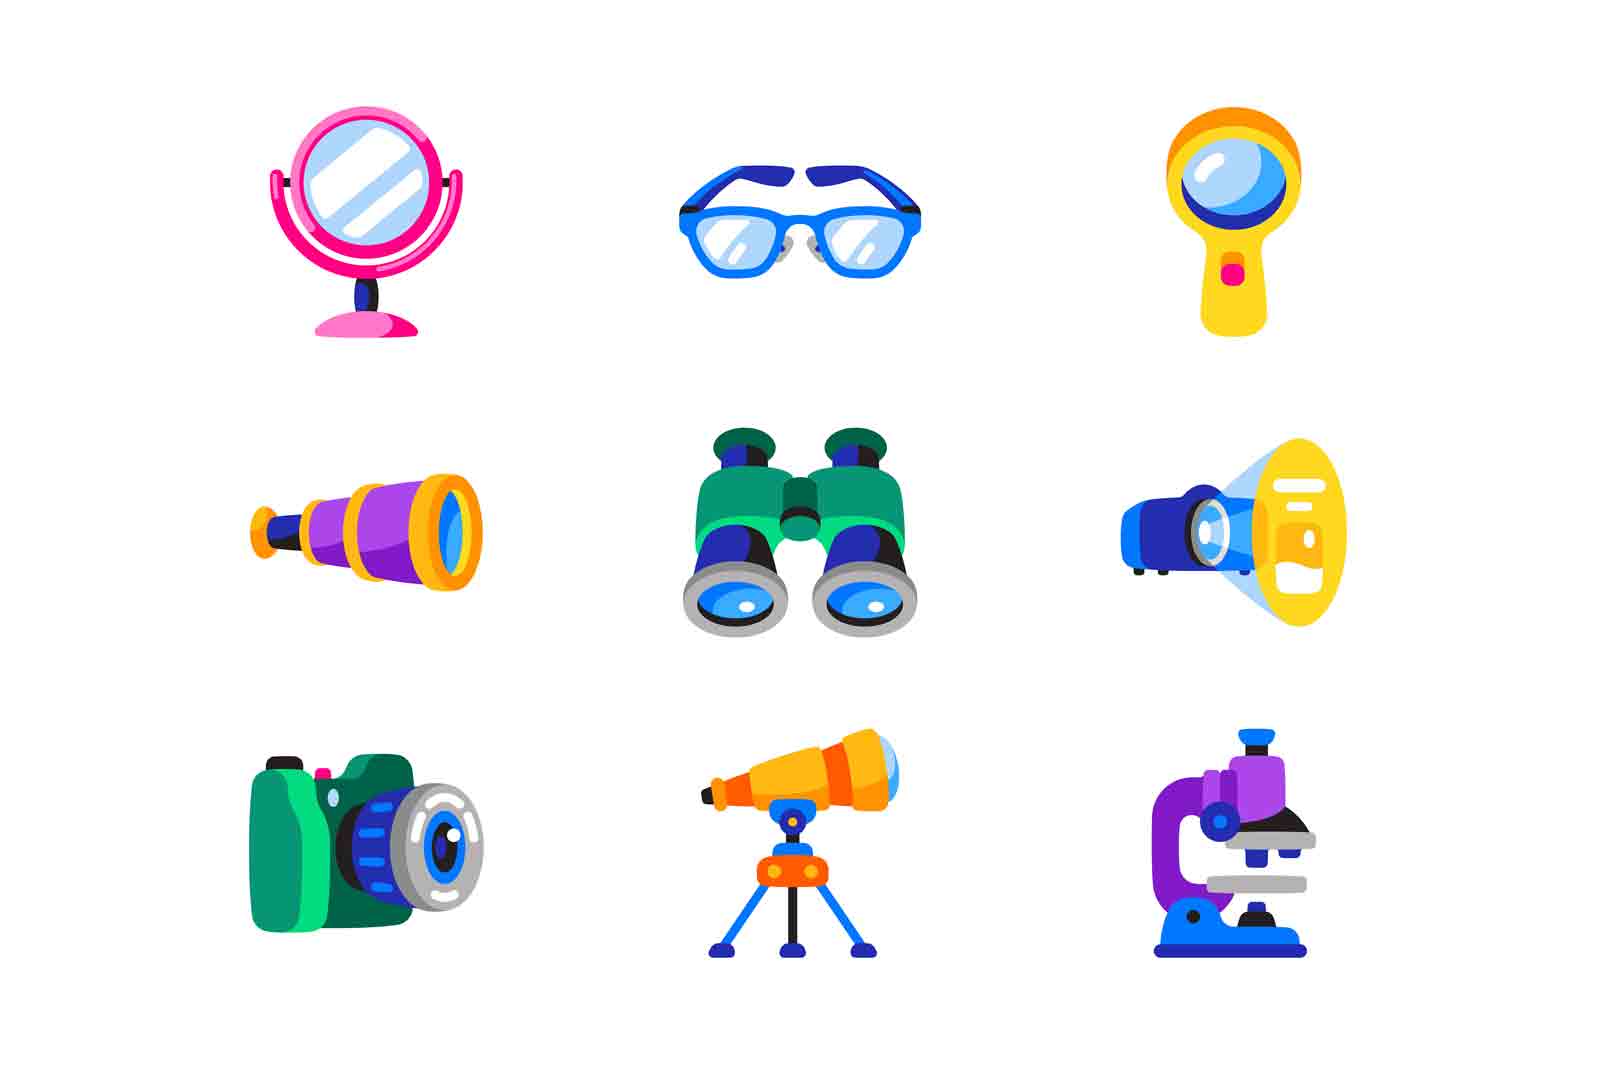 Optical accessories icons set vector illustration. Mirror, glasses, loupe, spyglass, microscope, and binoculars flat style concept